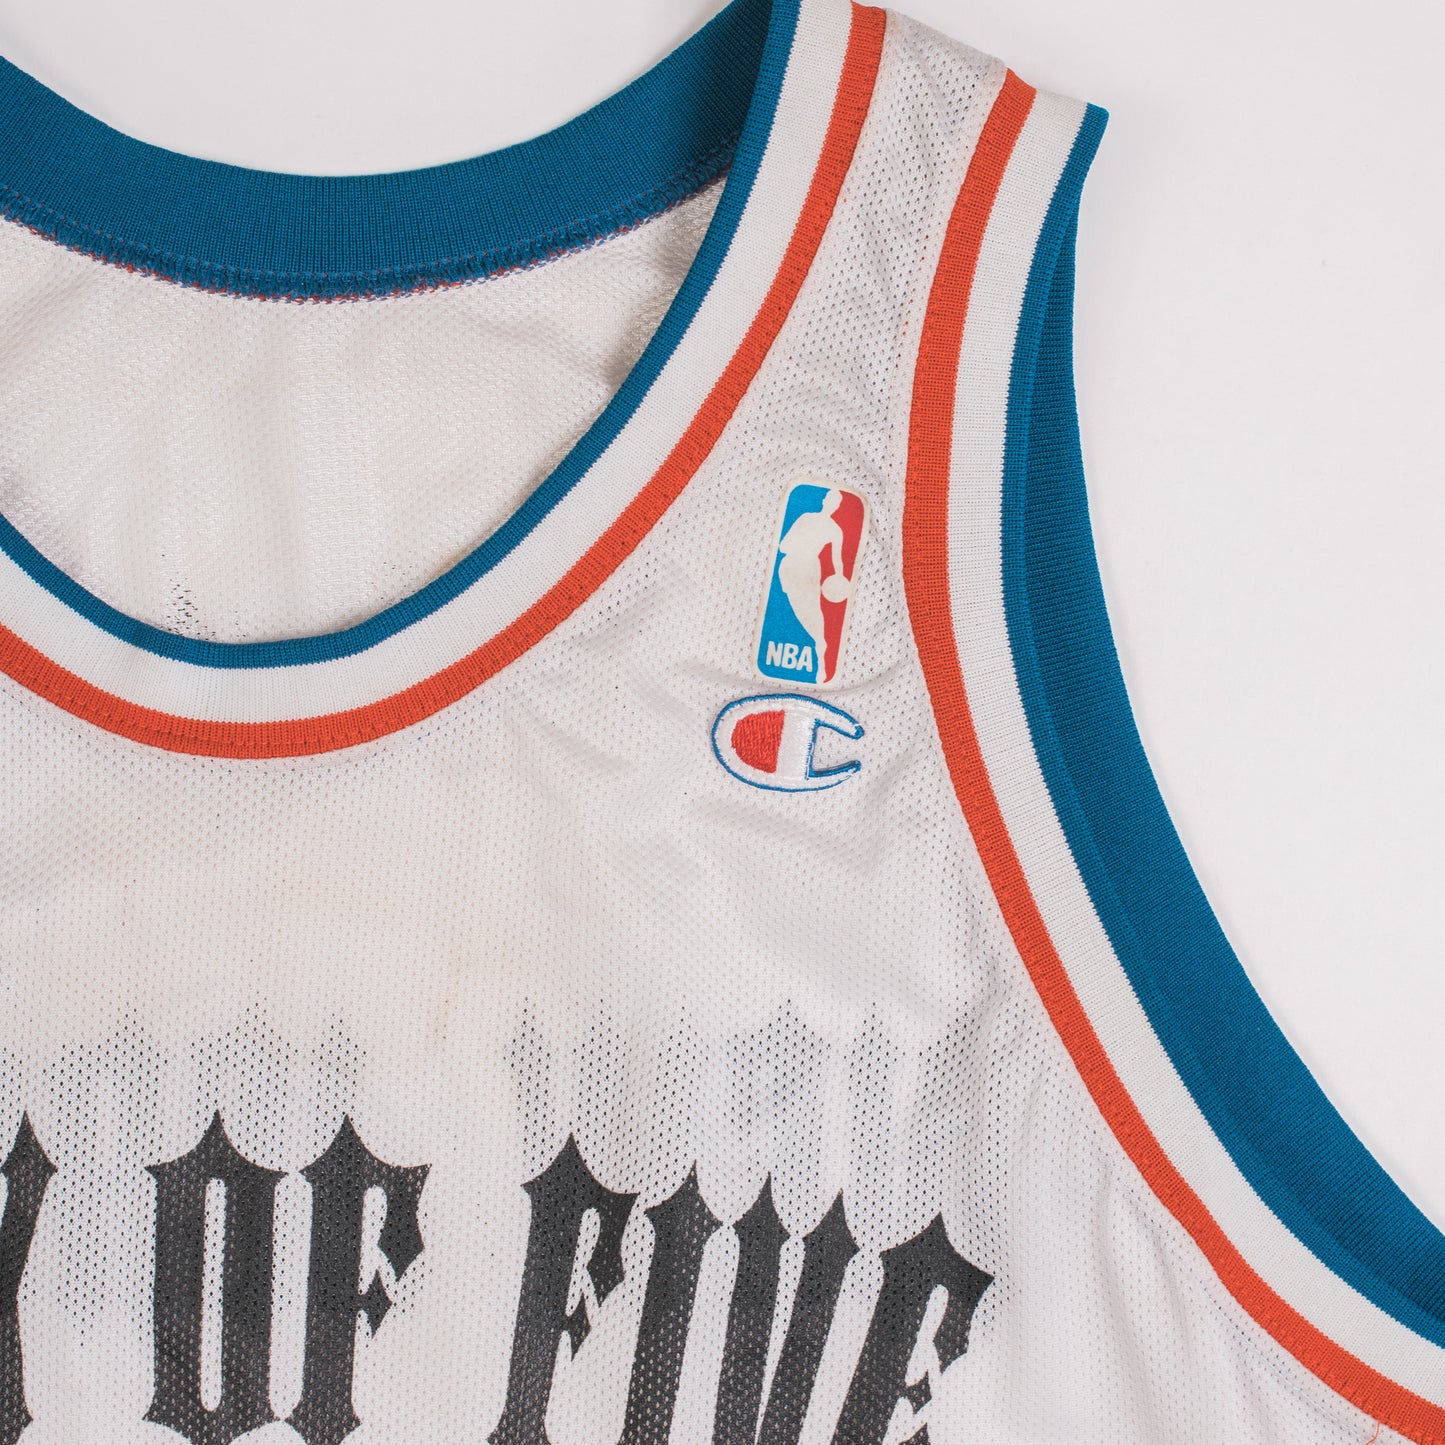 Vintage 90’s Fury Of Five Champion Basketball Jersey